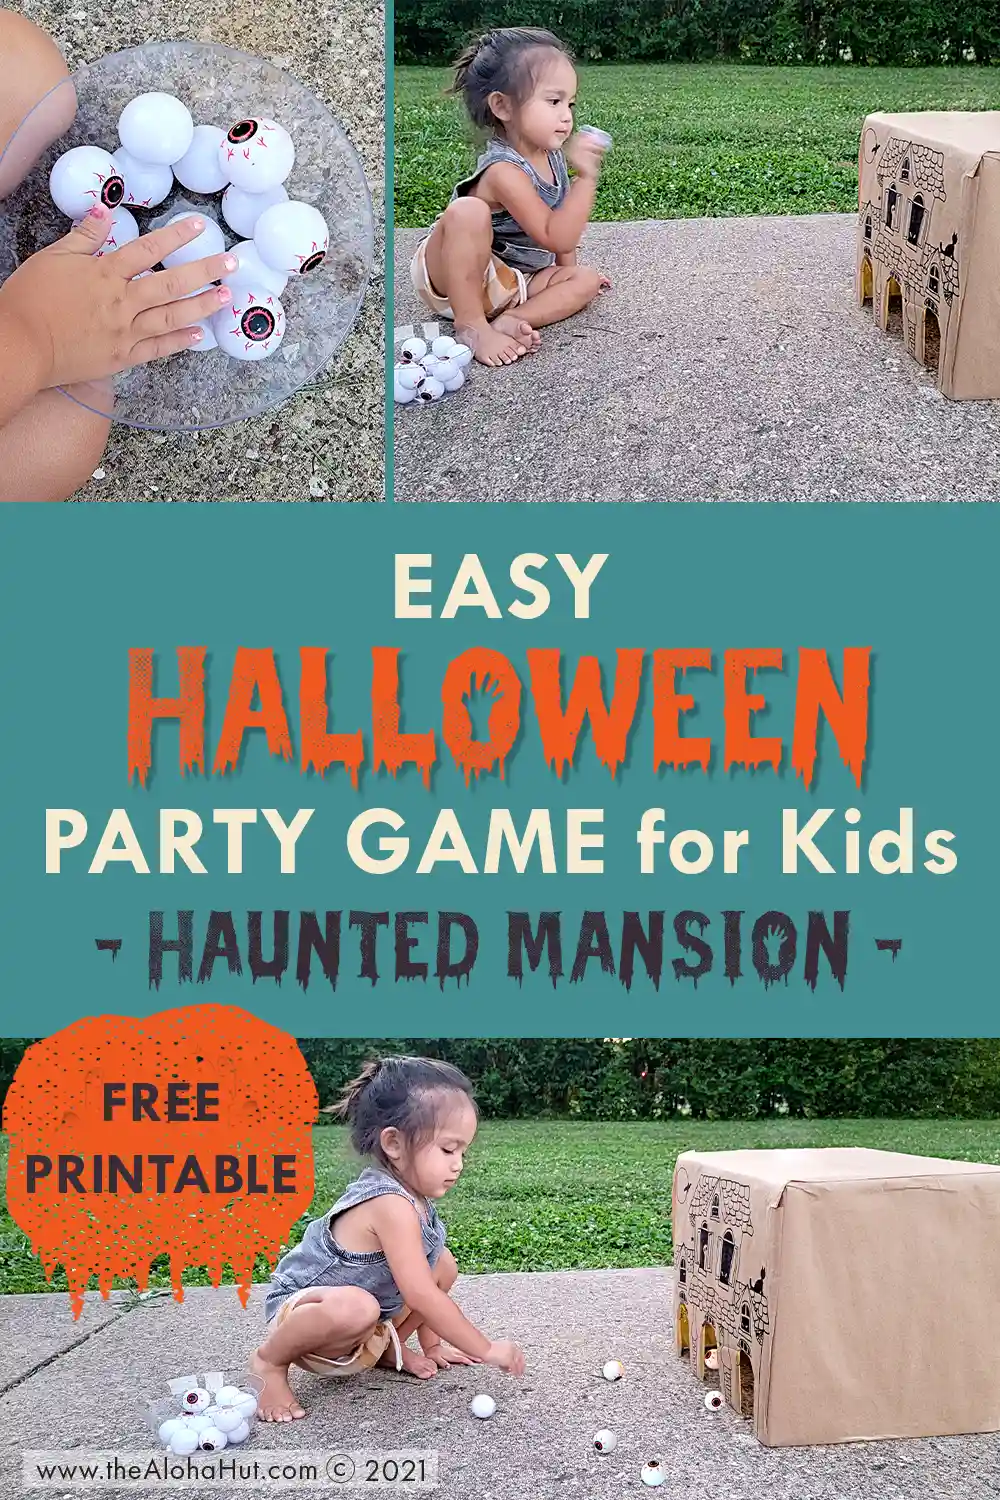 Halloween Party Game - Haunted Mansion - free printable - classroom party game ideas